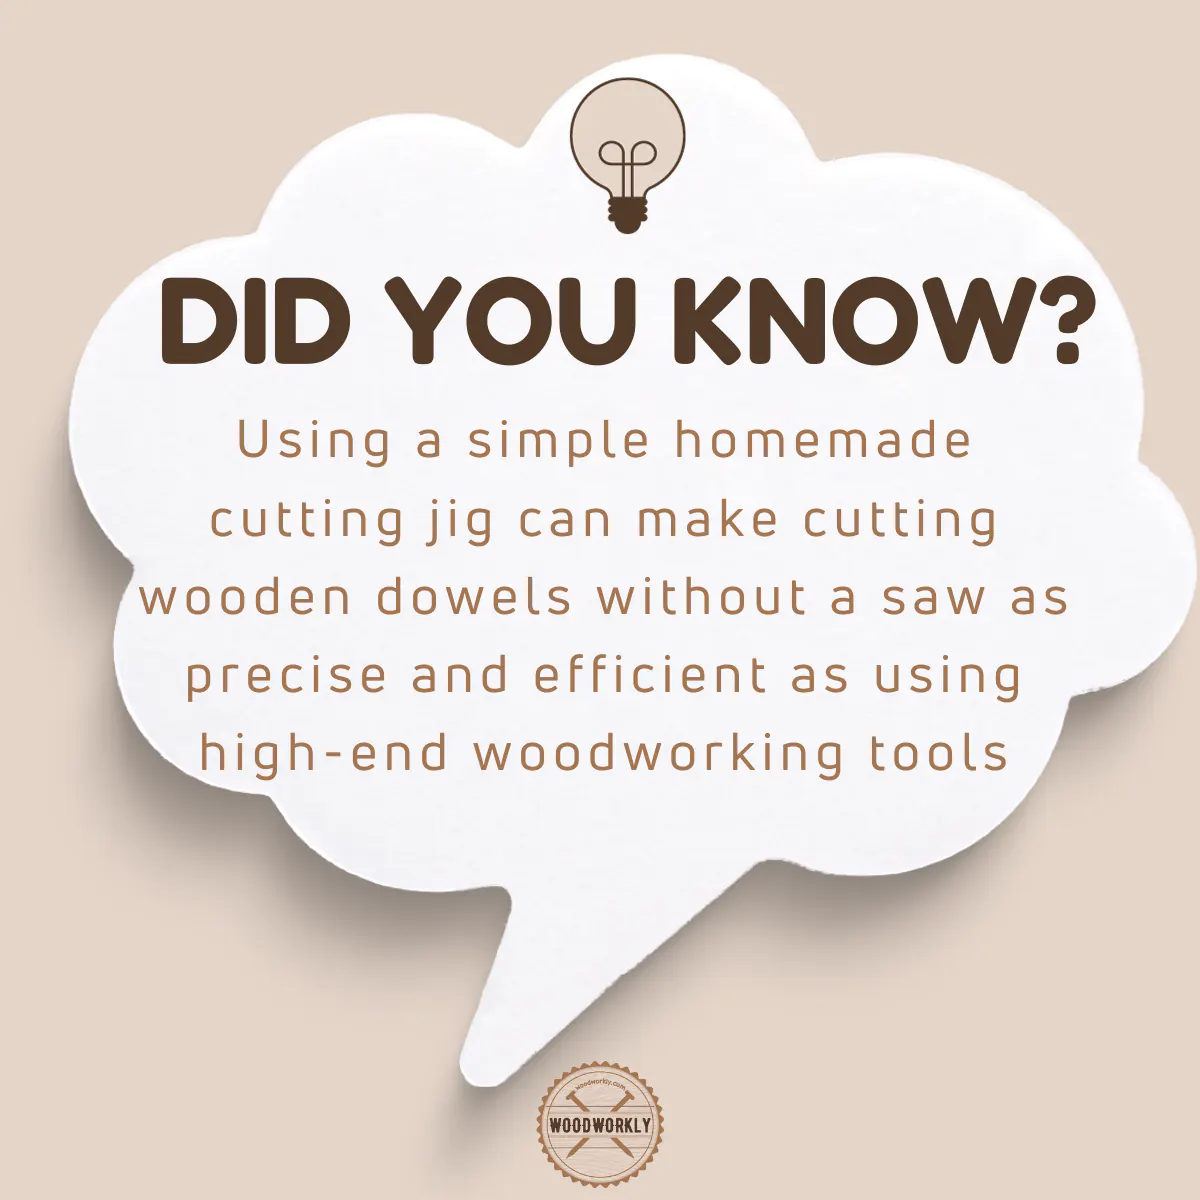 Did you know fact about cutting wooden dowels